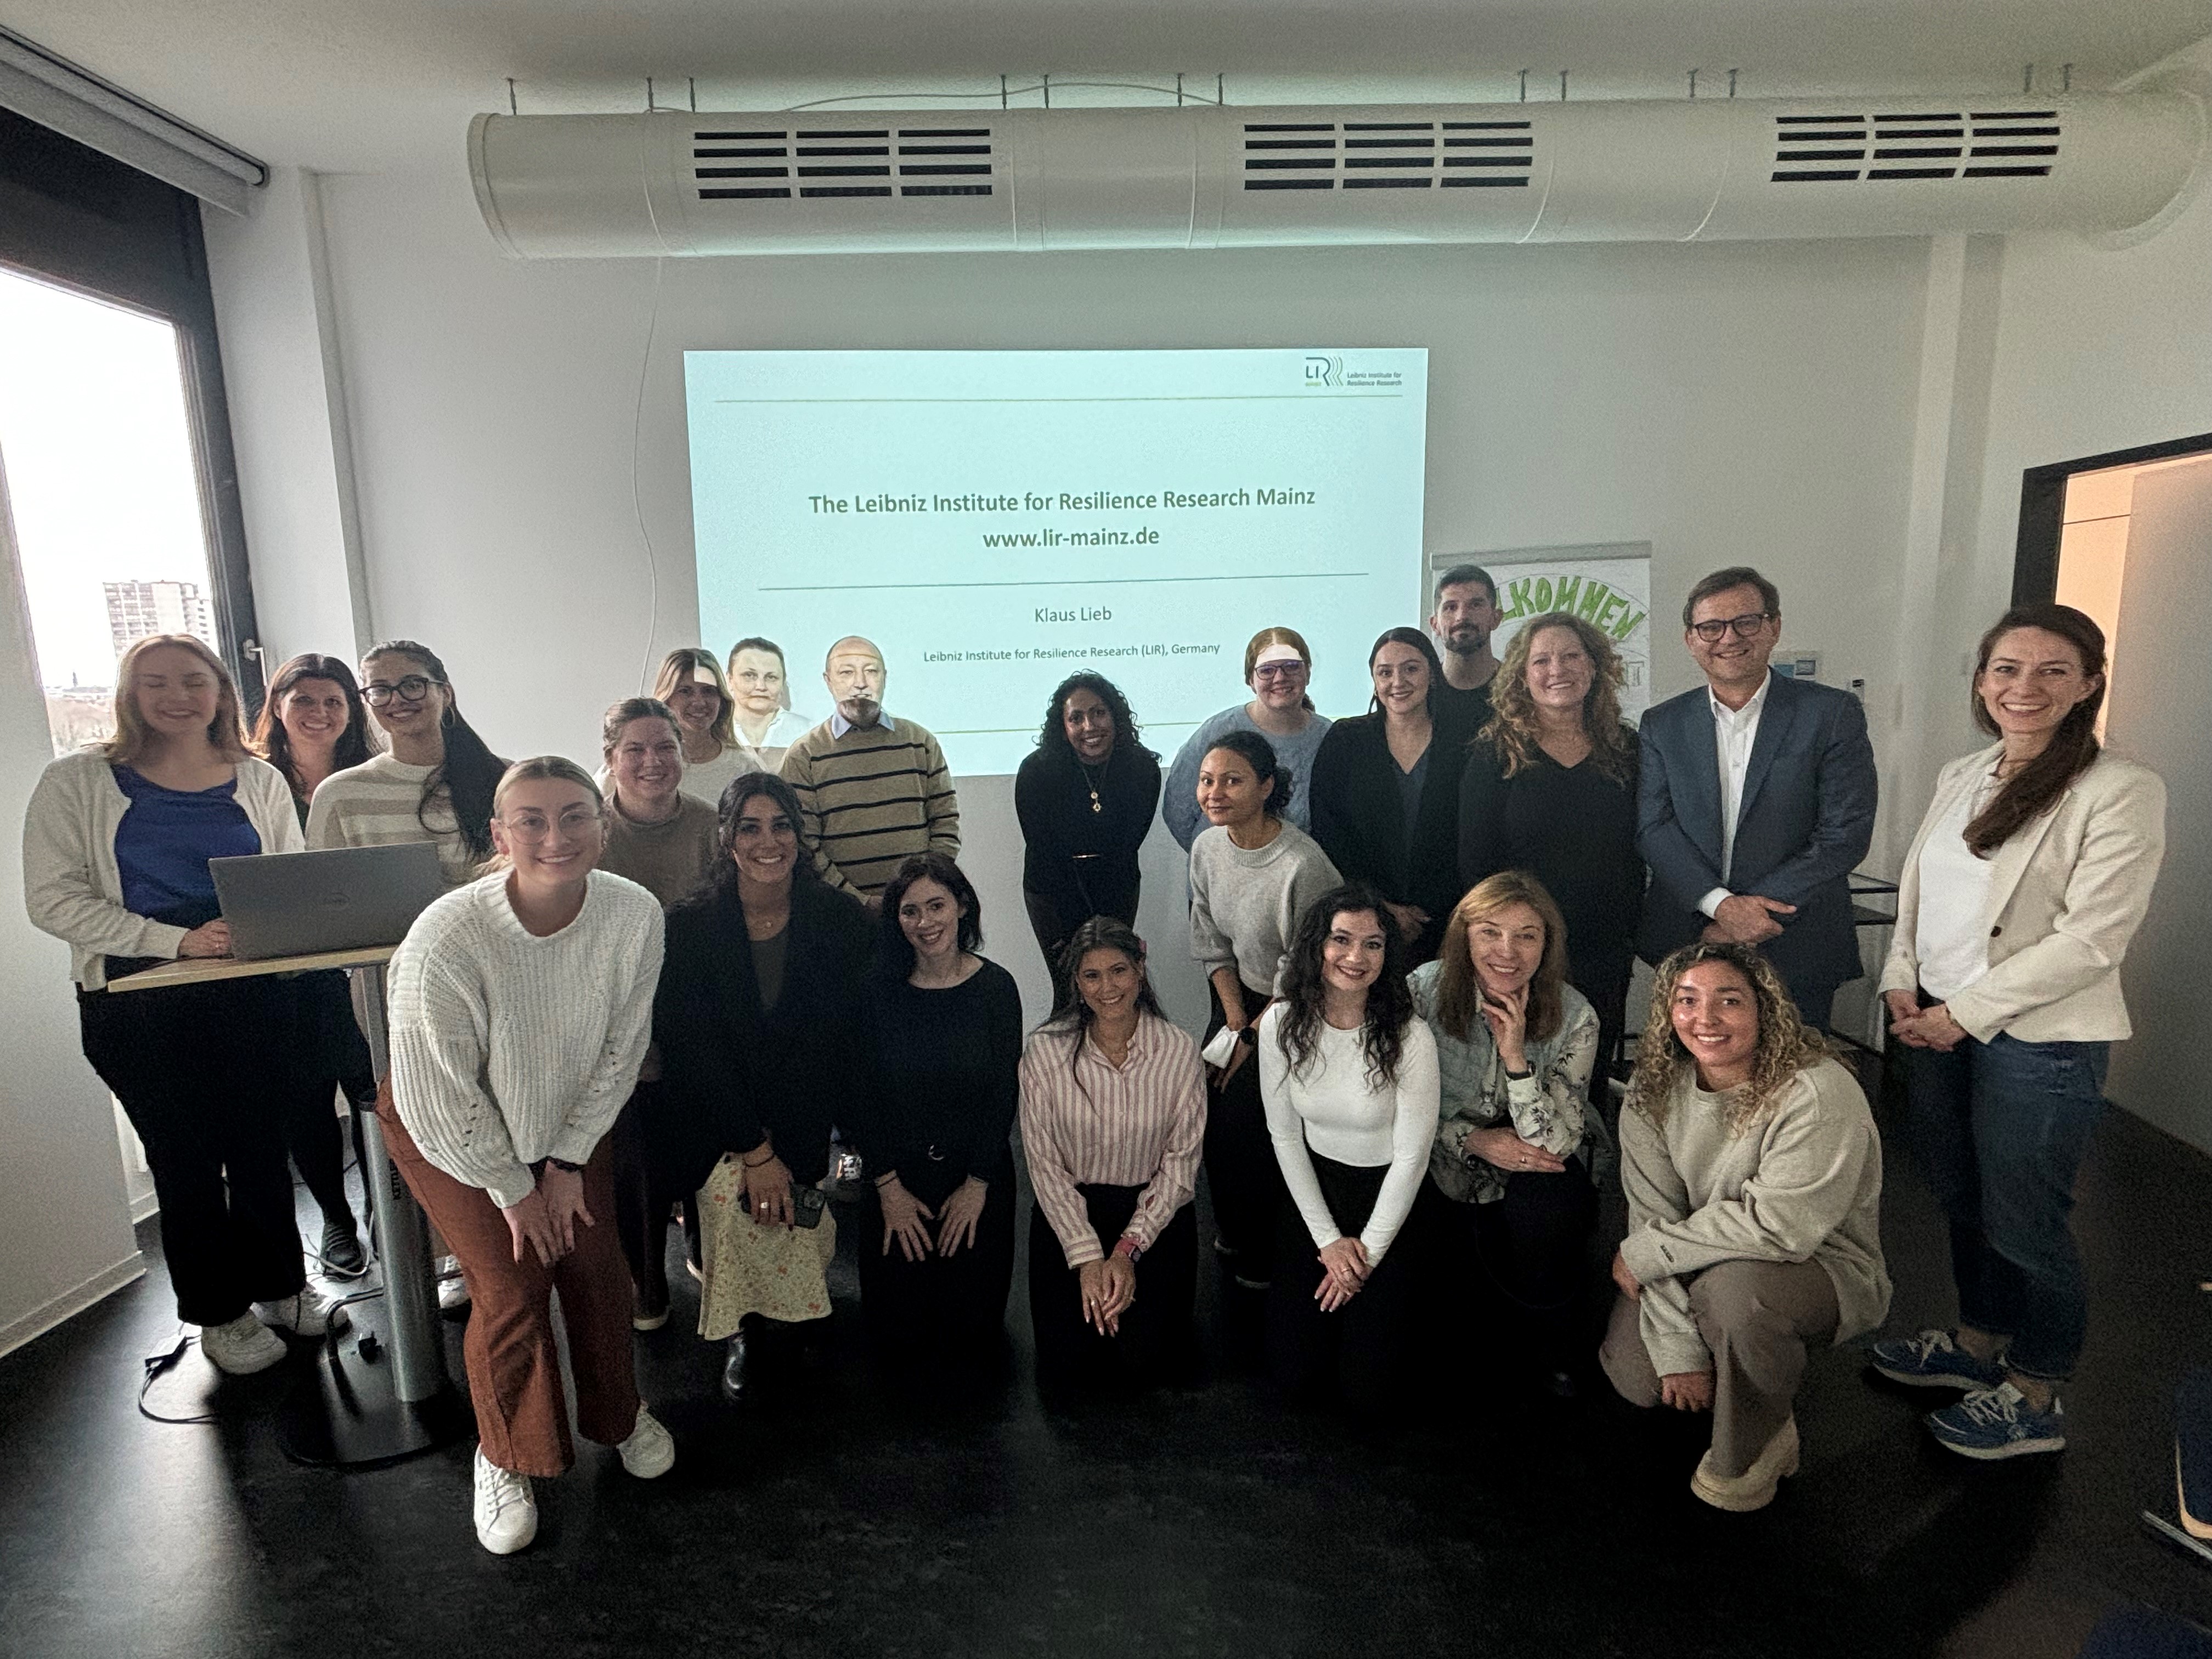 Visit of Marymount University to the Leibniz Institute for Resilience Research